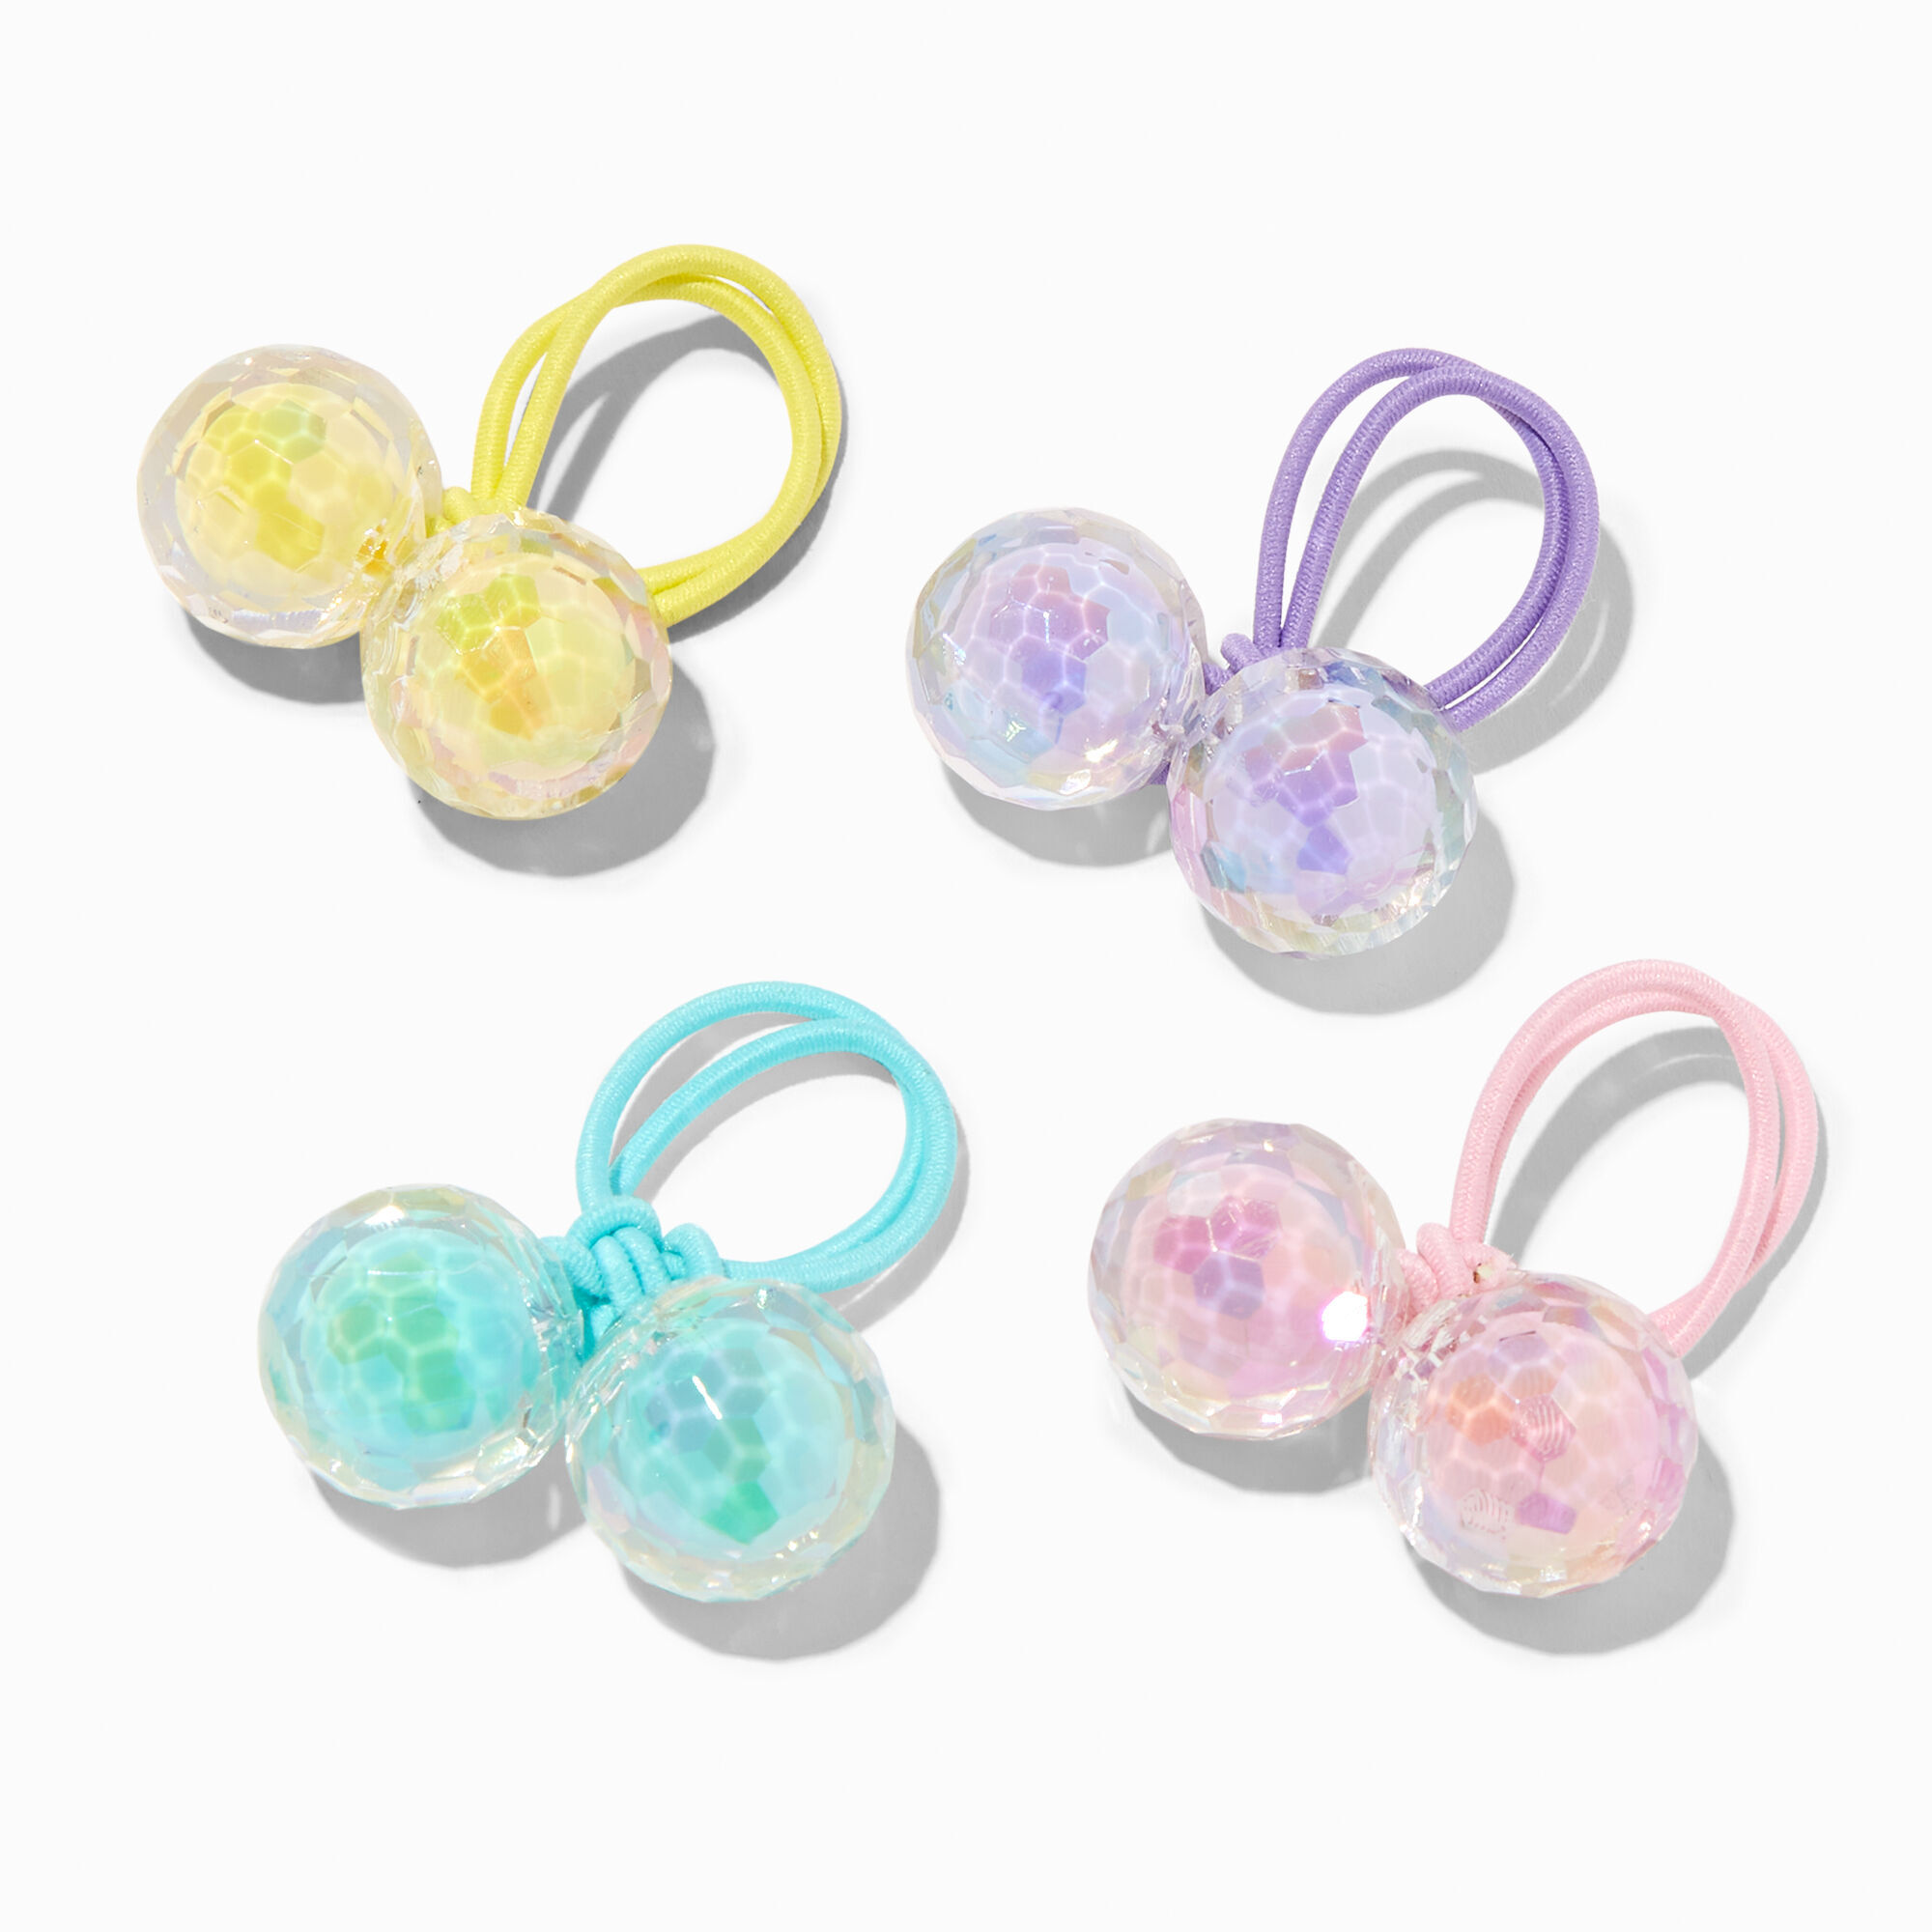 View Claires Club Pastel Iridescent Knocker Bead Hair Ties 4 Pack information